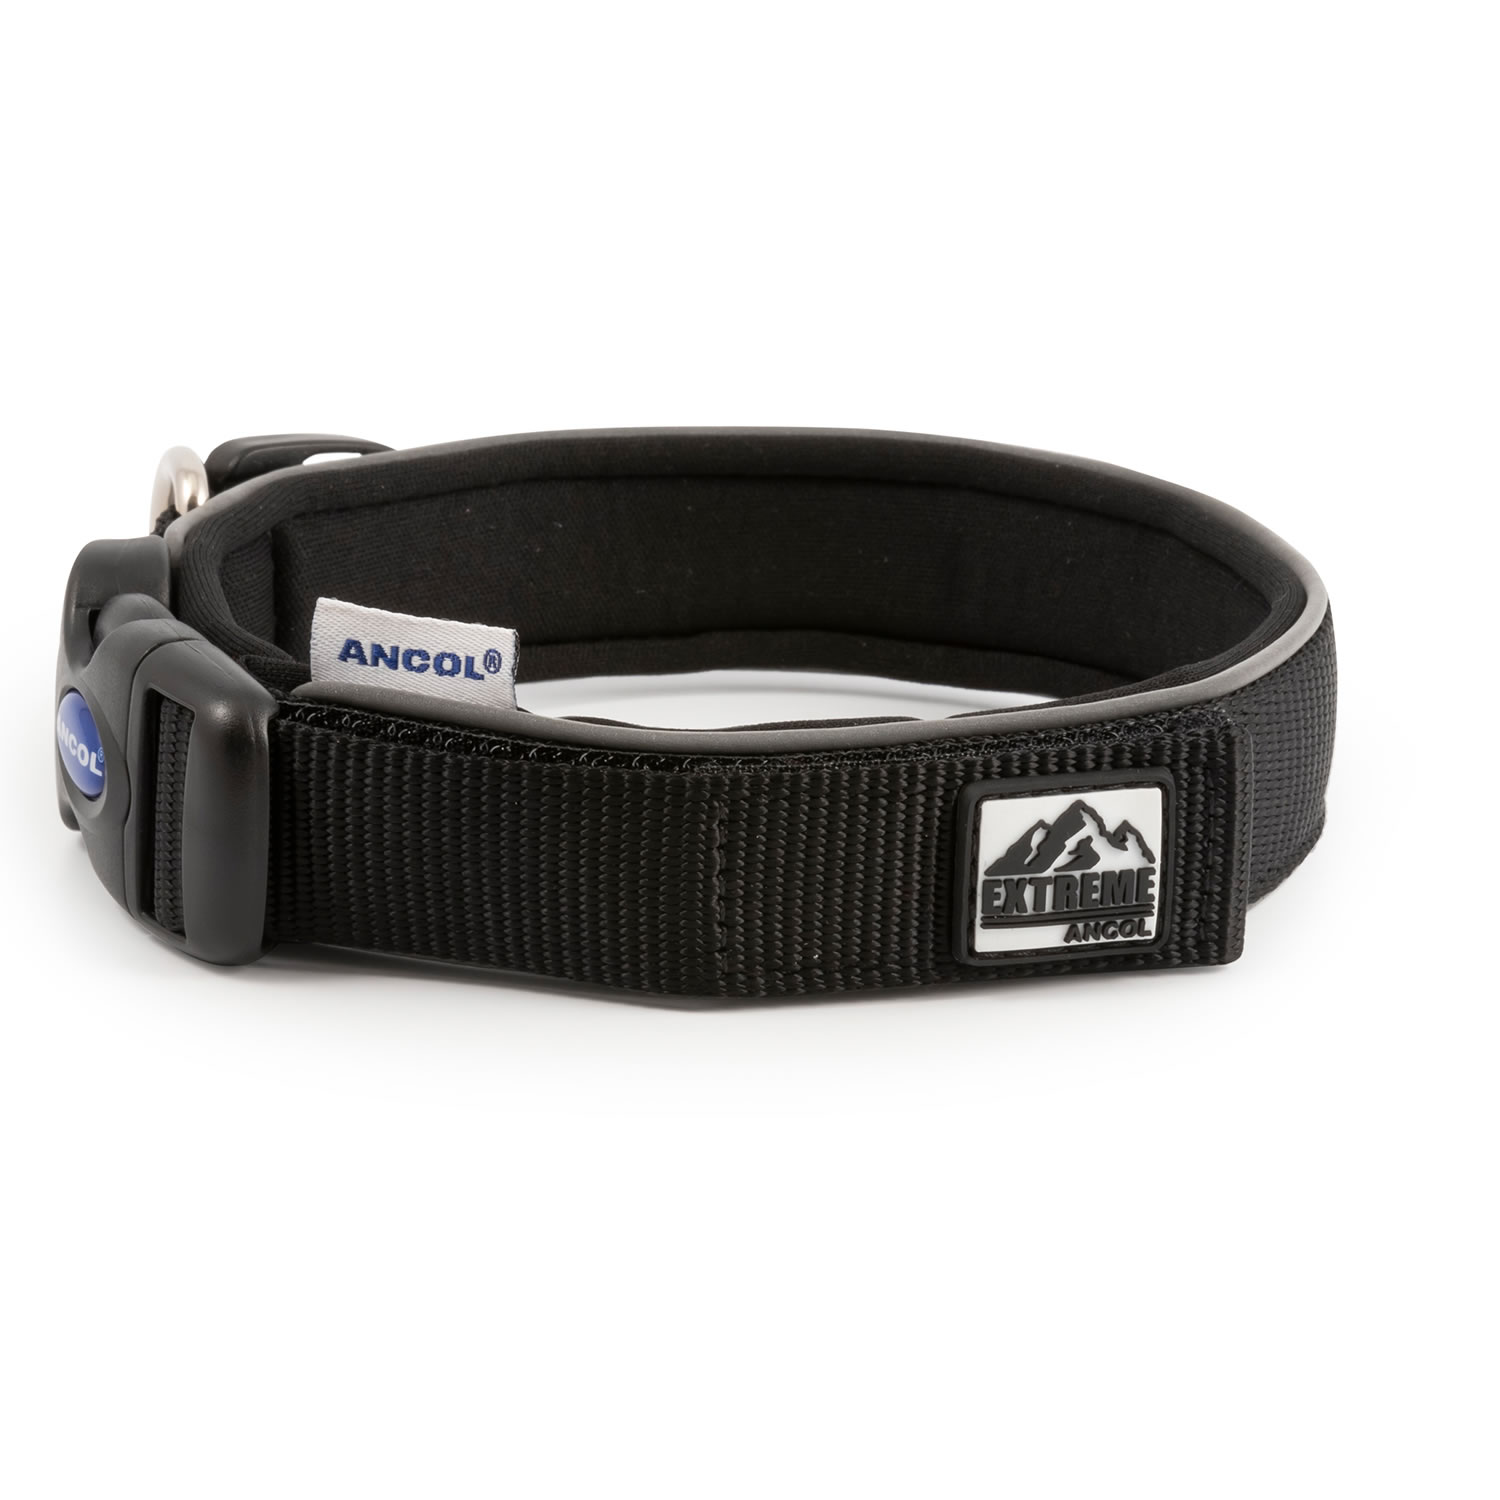 ANCOL EXTREME ULTRA PADDED COLLAR BLACK